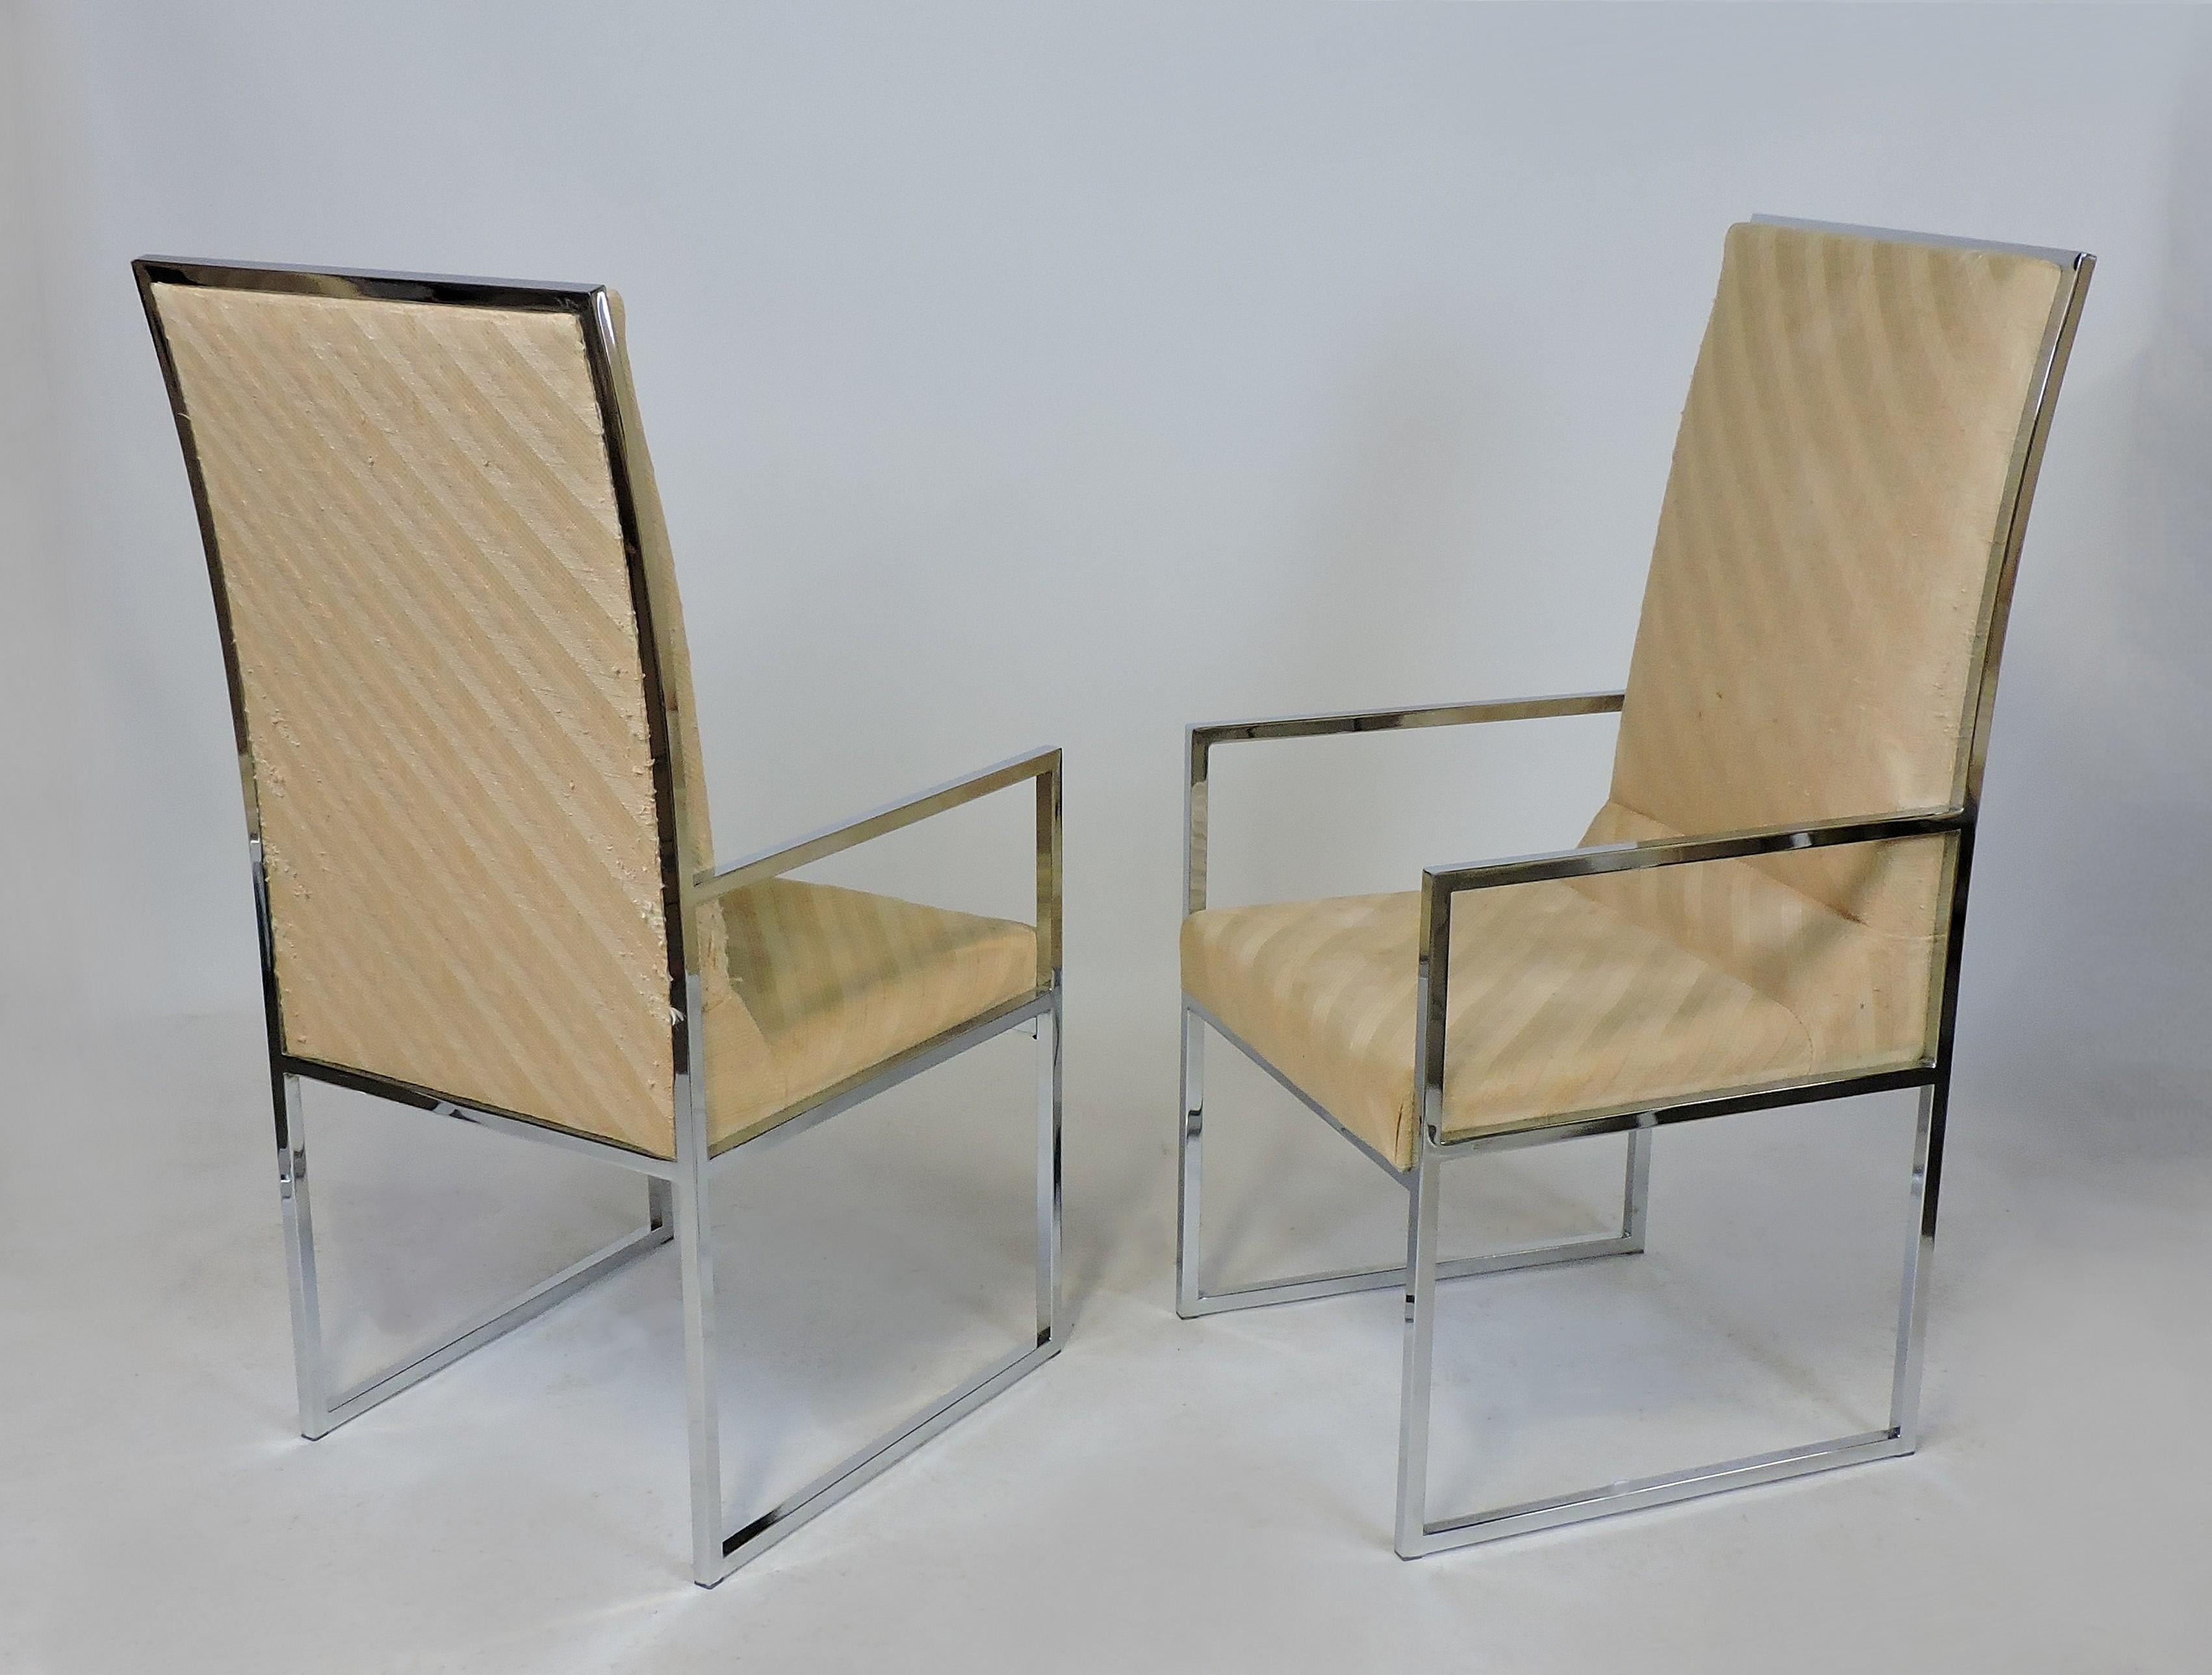 Handsome pair of high back dining chairs manufactured by Design Institute of America. These heavy and high quality chairs have a clean, classic look with thin chrome frames and upholstered backs and seats. This pair had been part of a larger set of